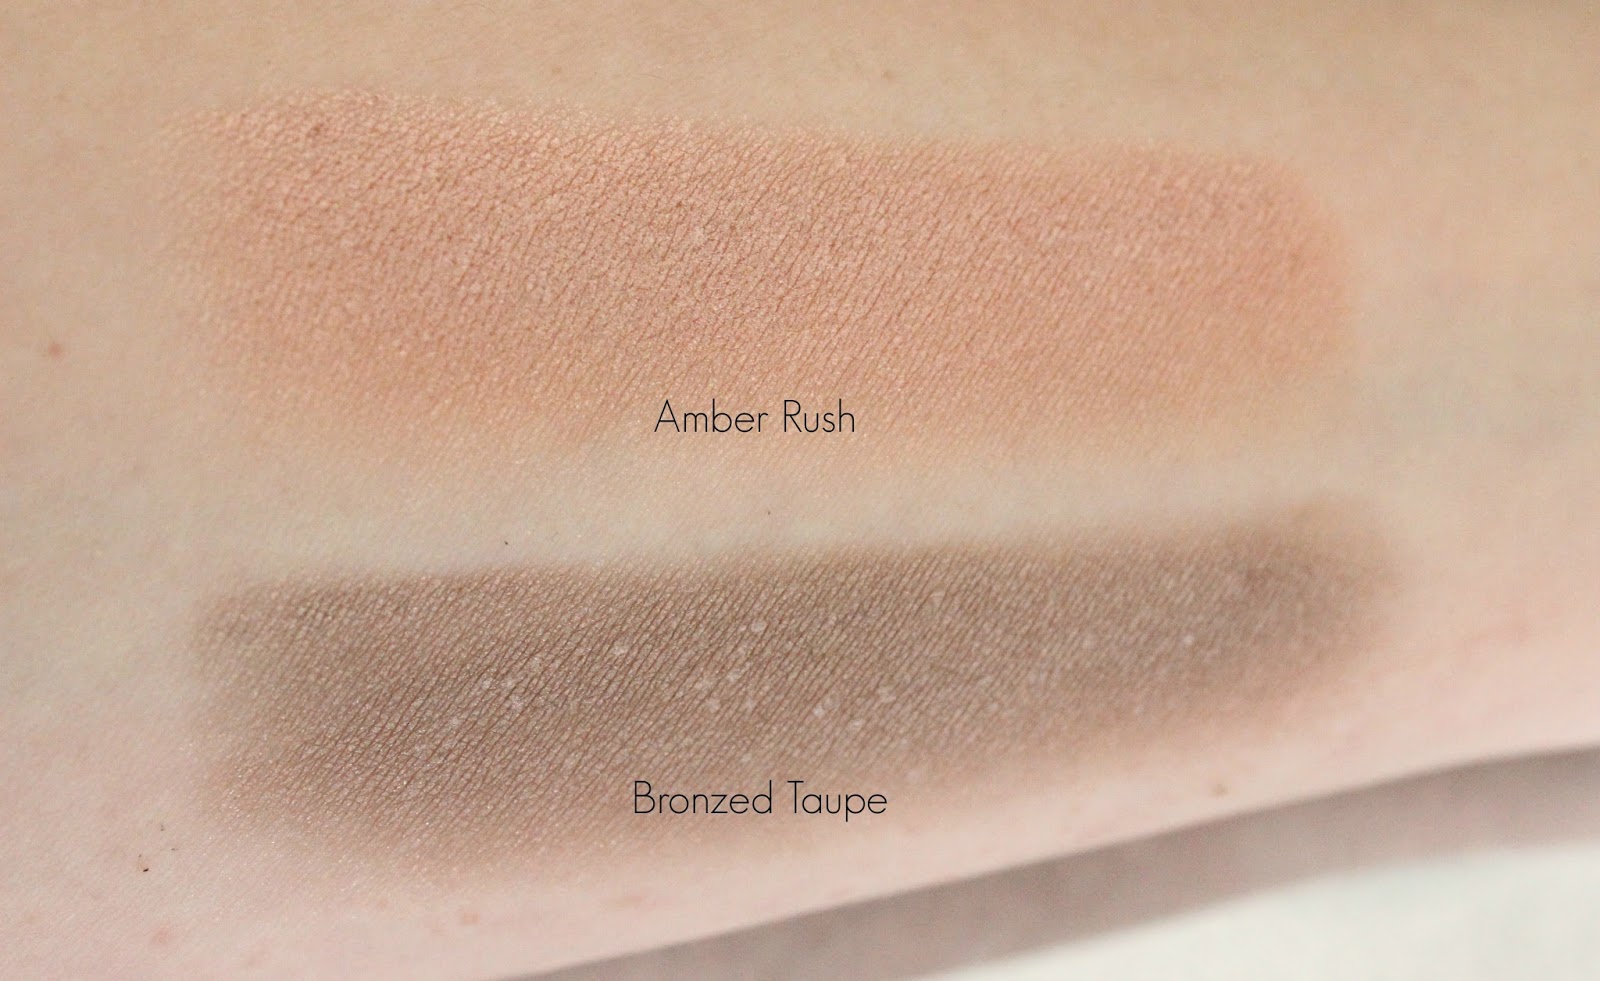 L'Oreal Infallible Eyeshaows in Amber Rush and Bronzed Taupe